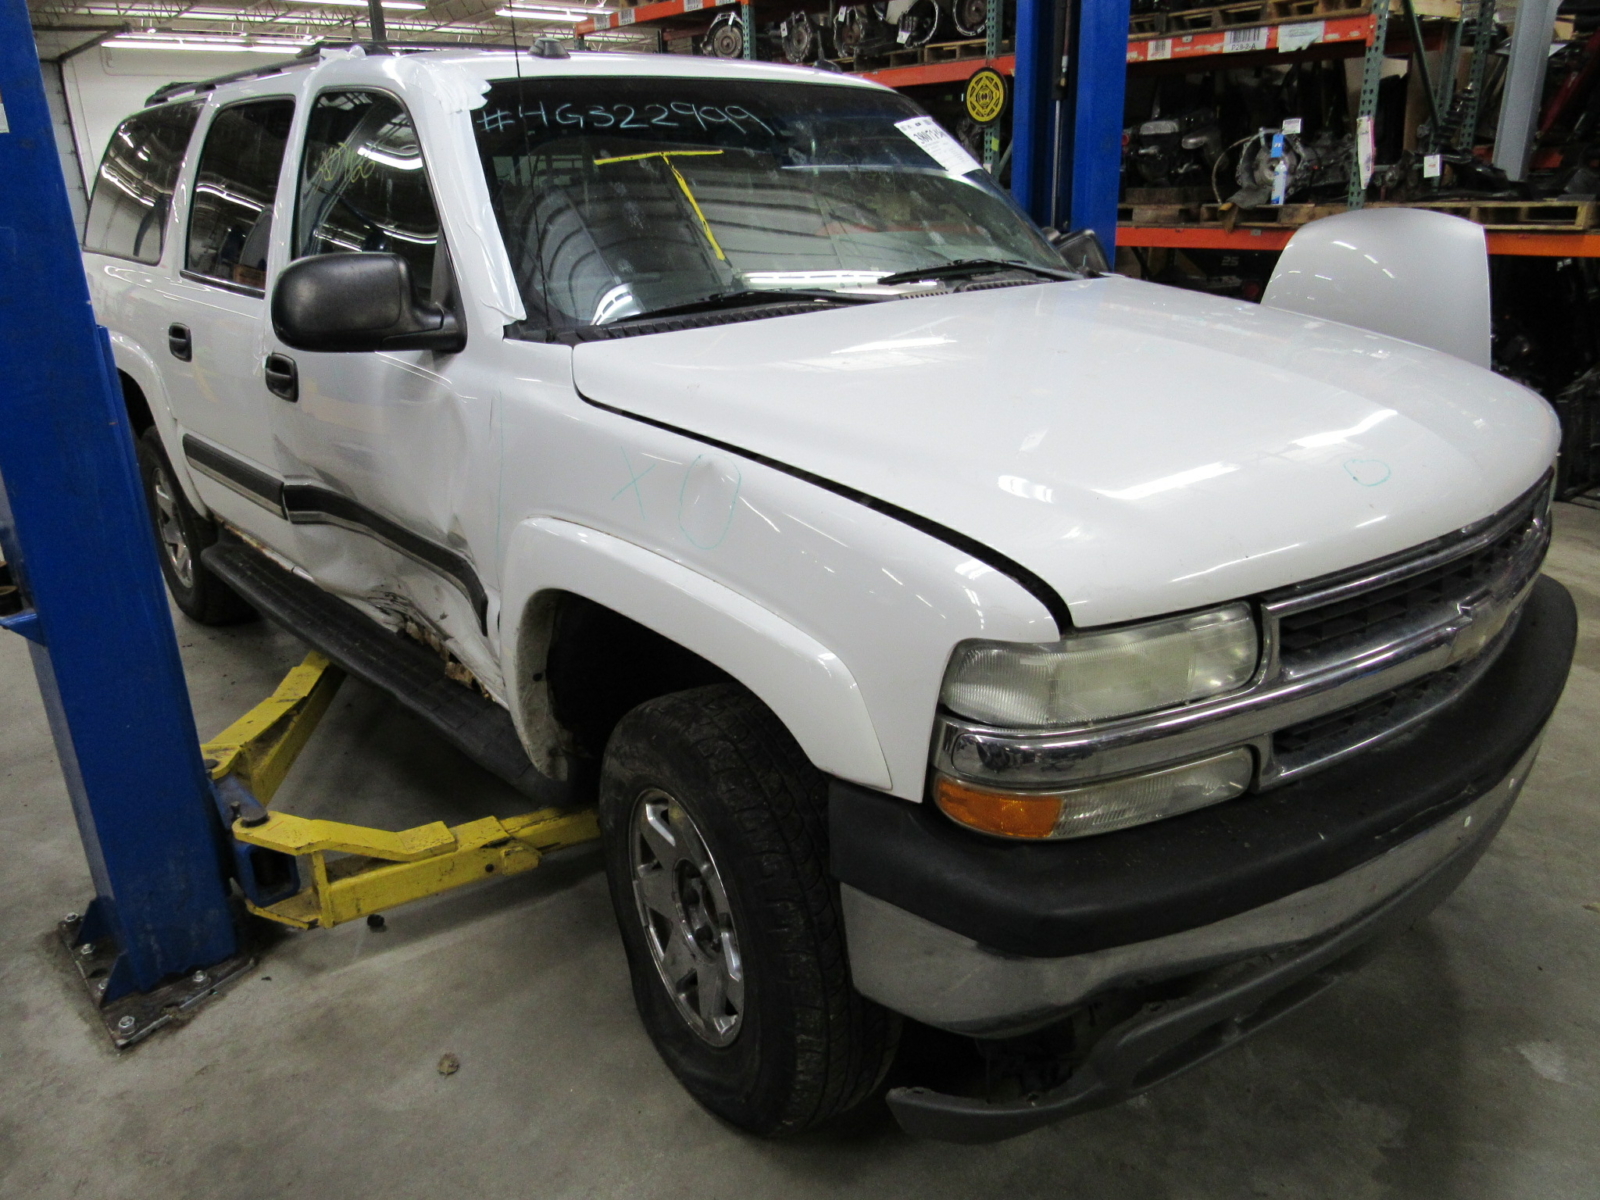 04 Chevrolet Suburban 1500 5.3 2WD LM7/4L60e In For Parts 1-31-24